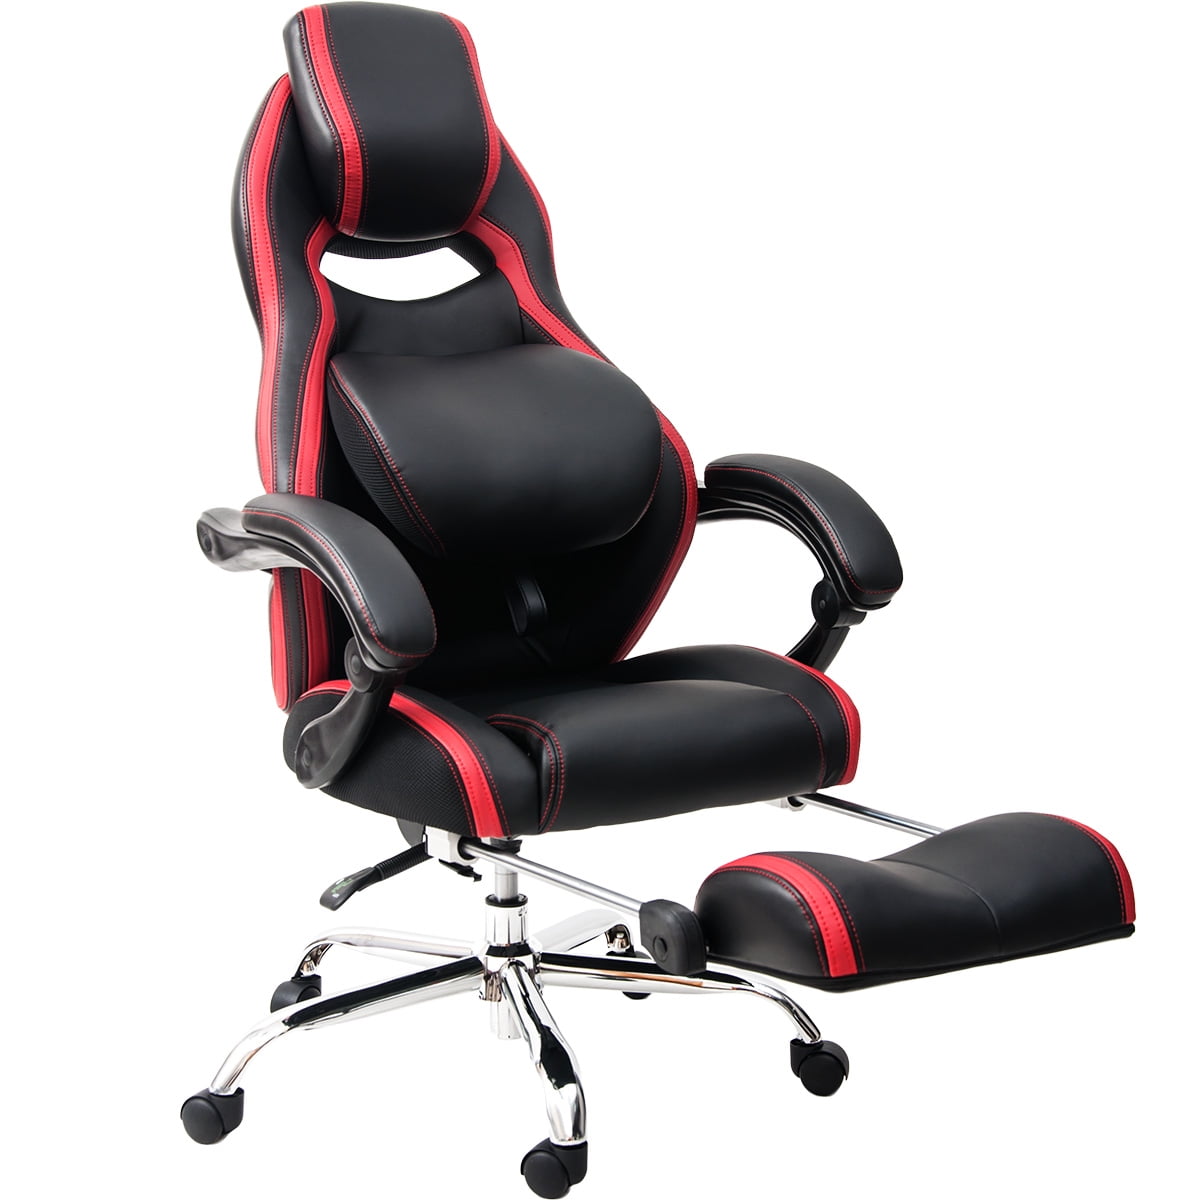 Office Executive Racing Gaming Chair Swivel Lift PU Leather Computer Desk Chairs 